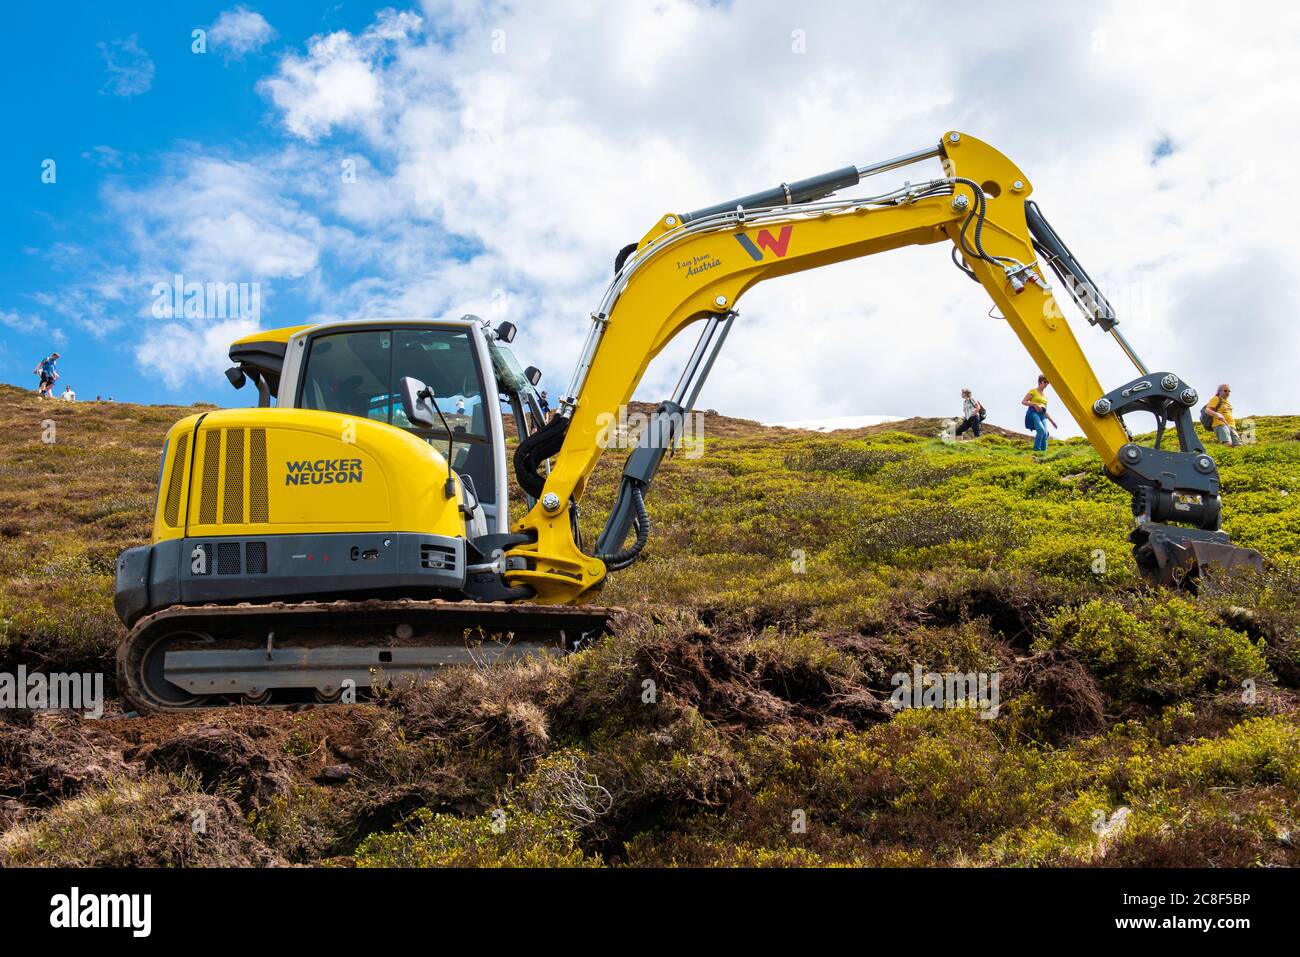 MAYRHOFEN, AUSTRIA - Jun 22, 2019: small yellow excavator used for a way on AHORN mountain with tourists near it Stock Photo